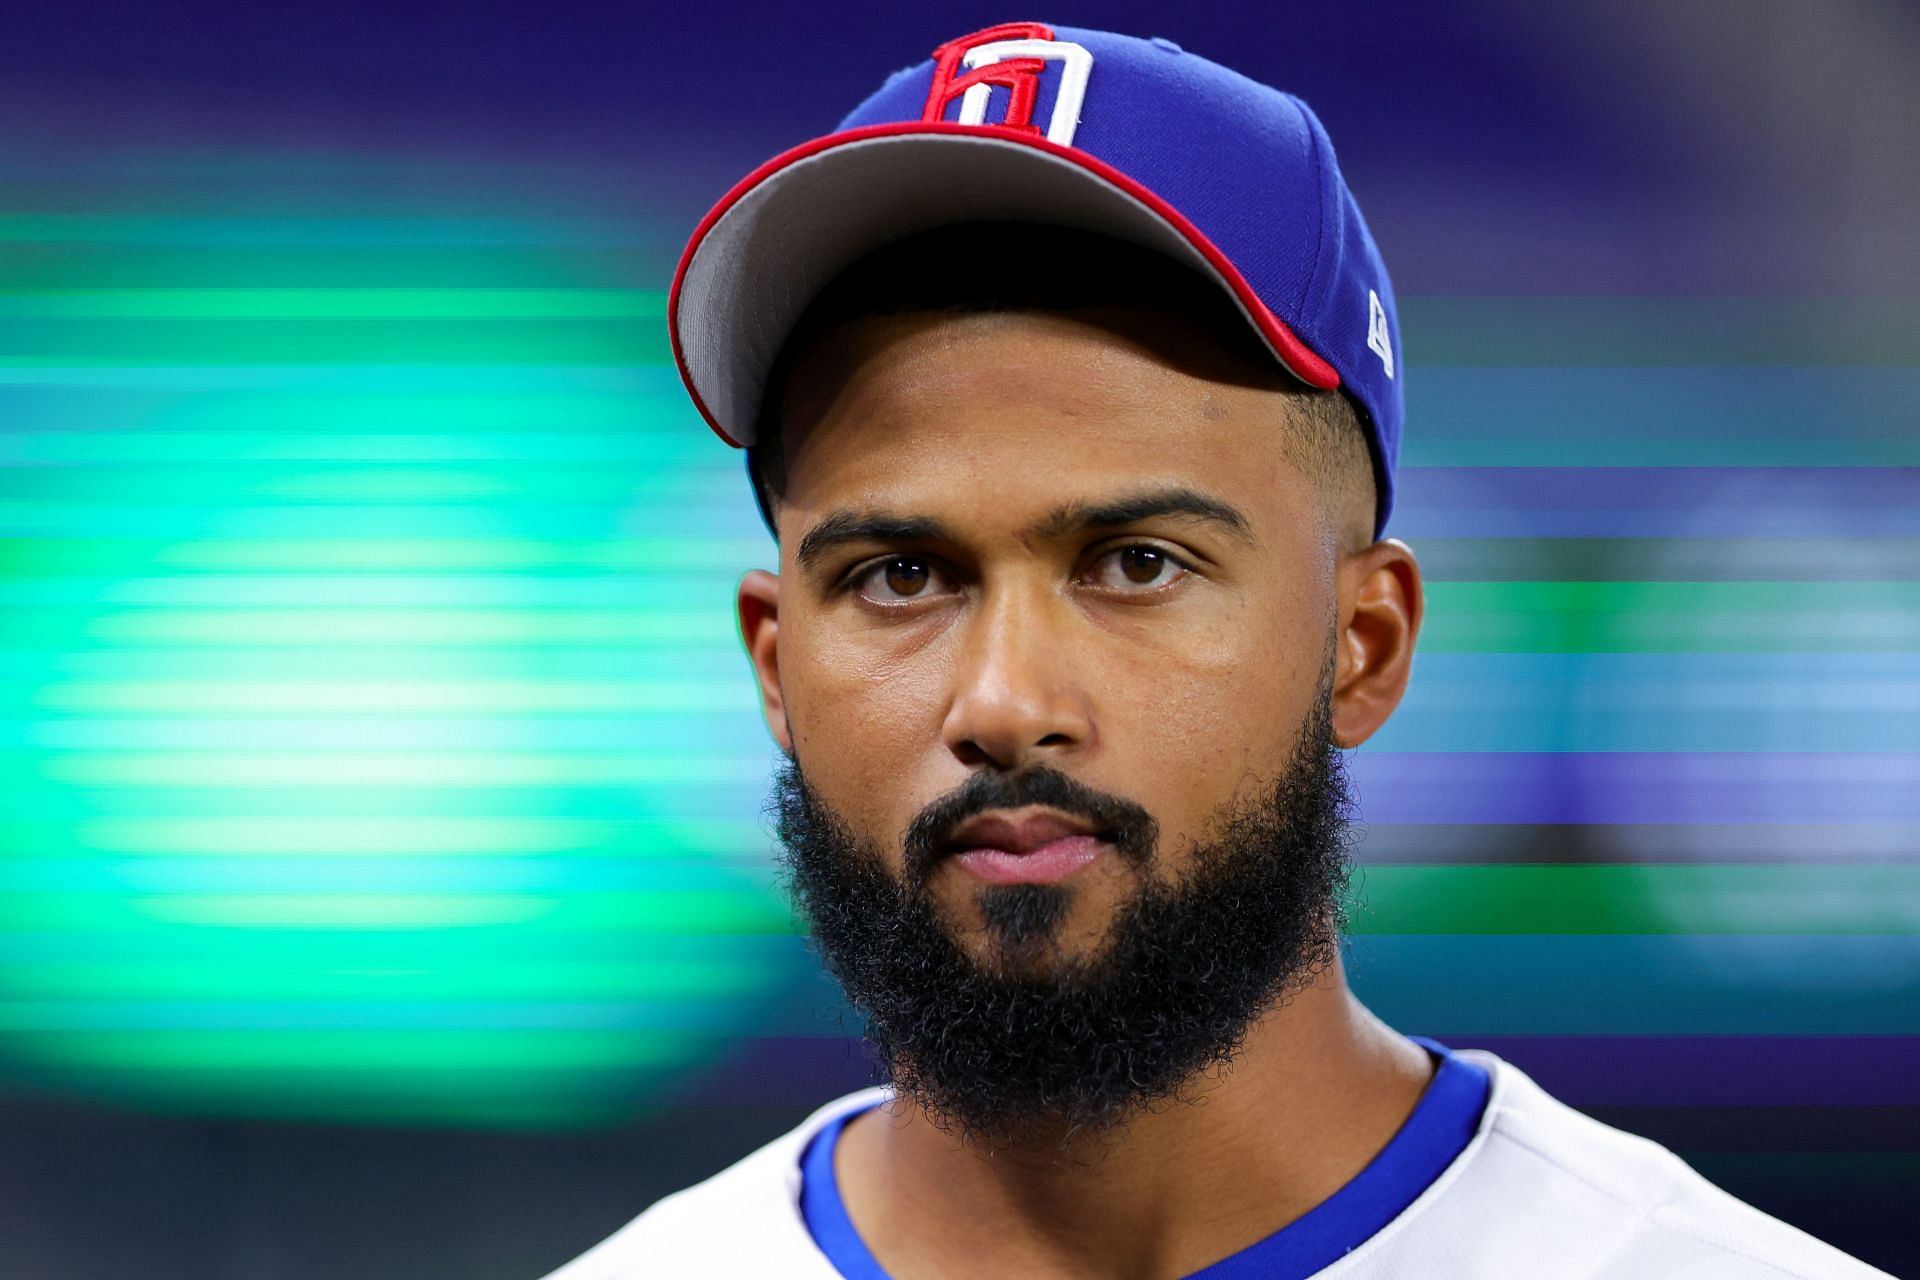 Fans react to the Dominican Republic’s stacked World Baseball Classic